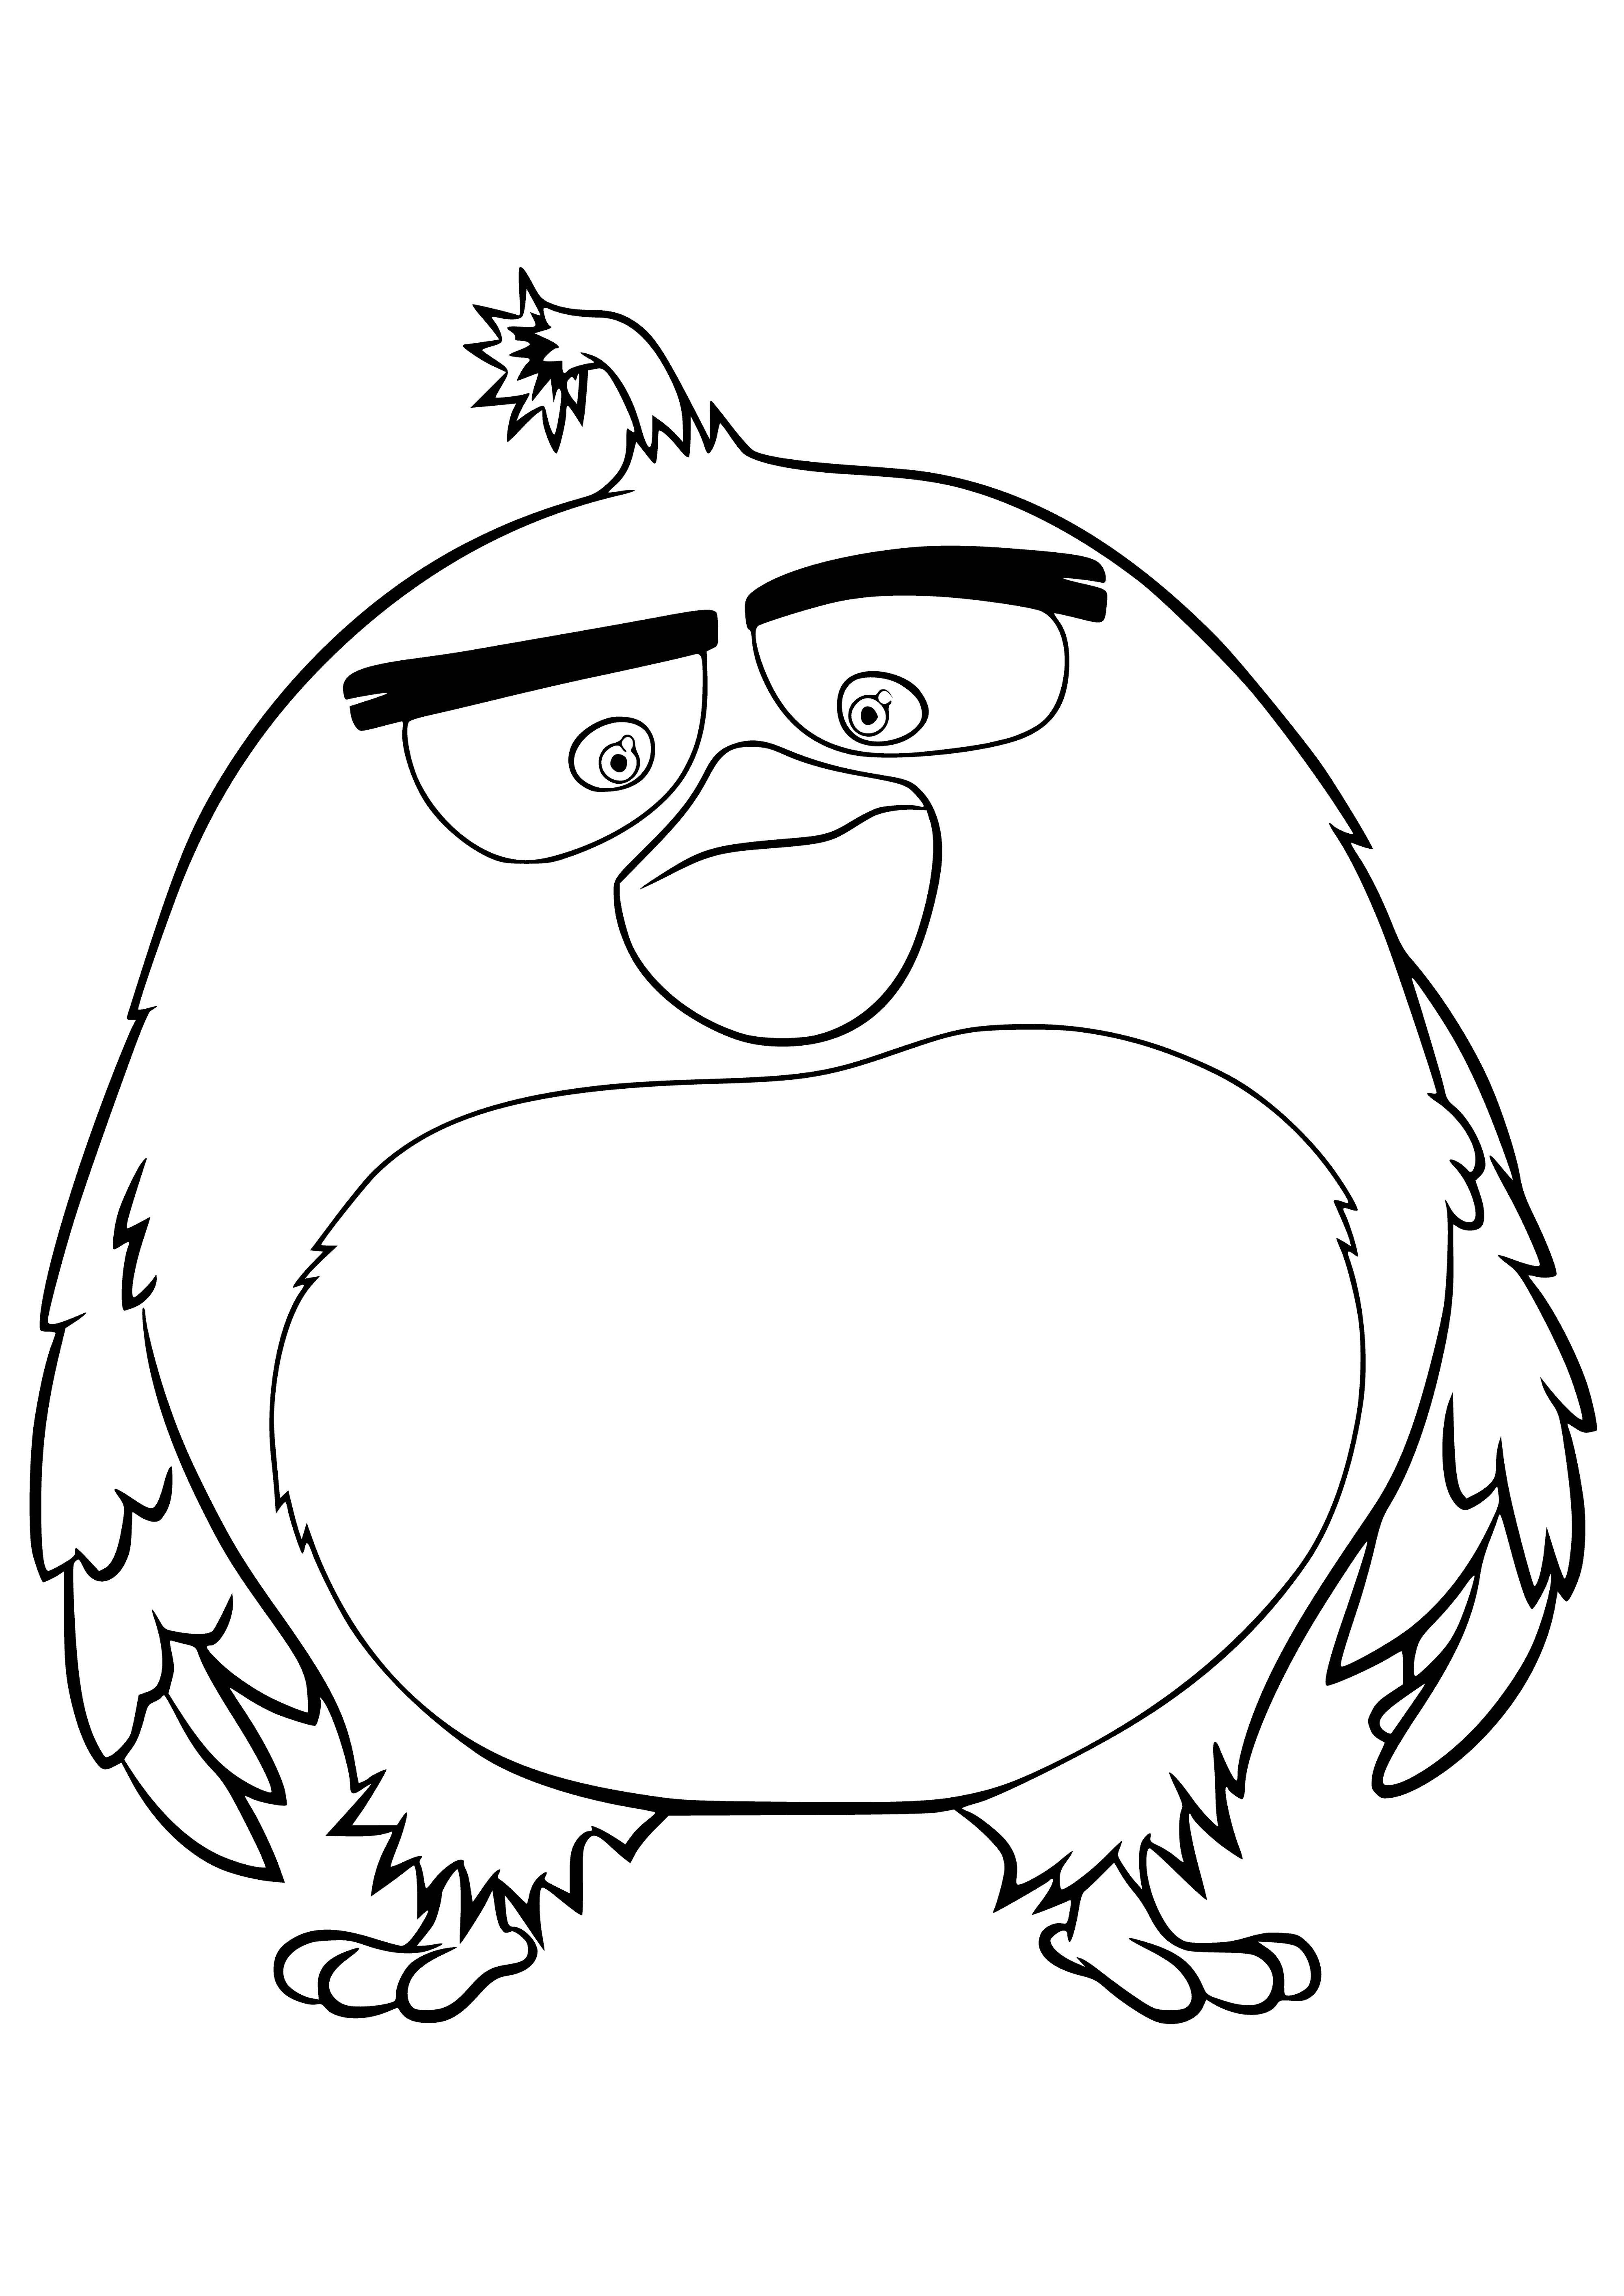 Bombs coloring page